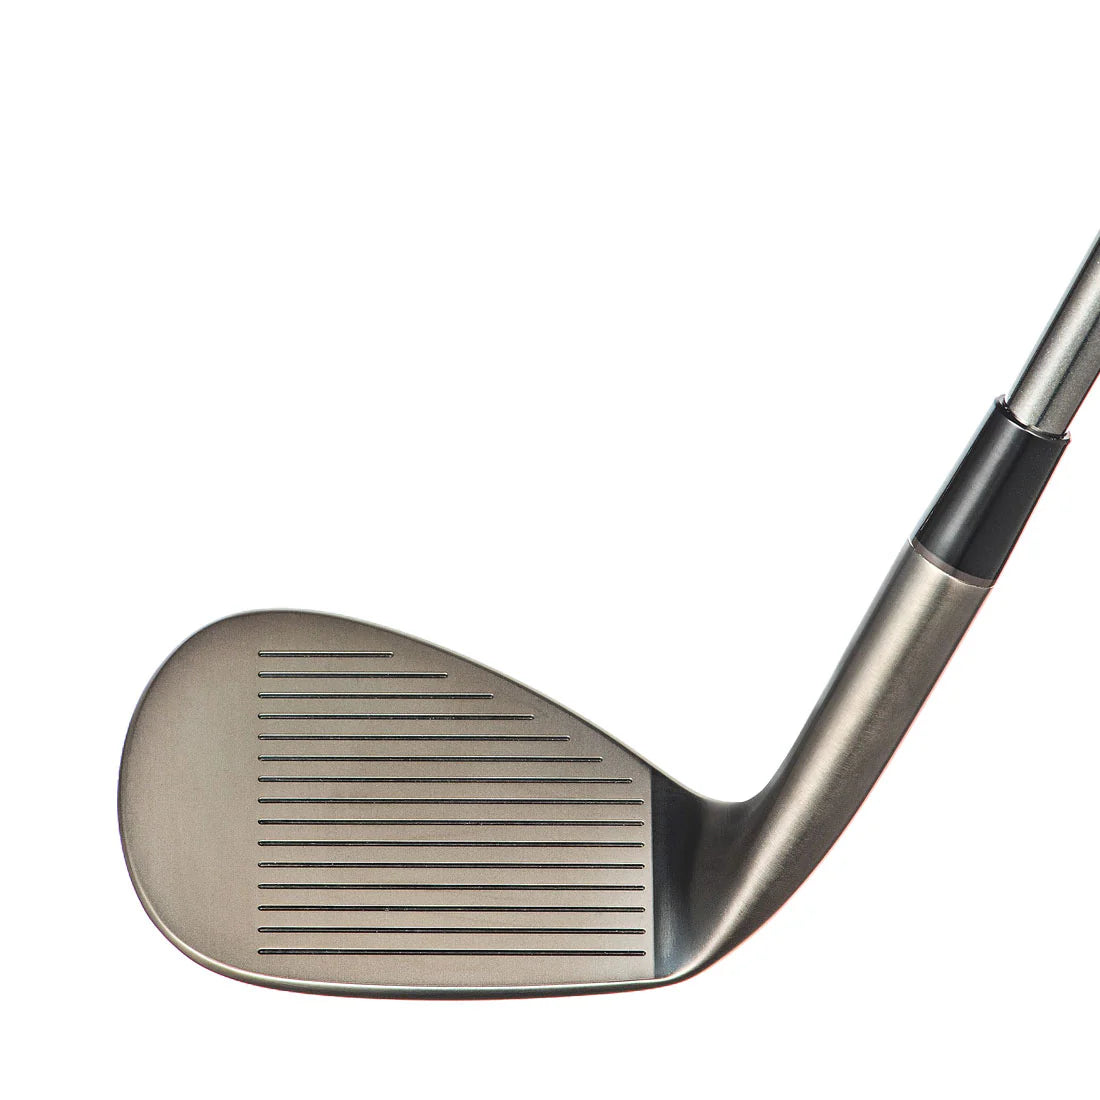 Fourteen RM-ā Forged Wedge Available in 2 Finishes